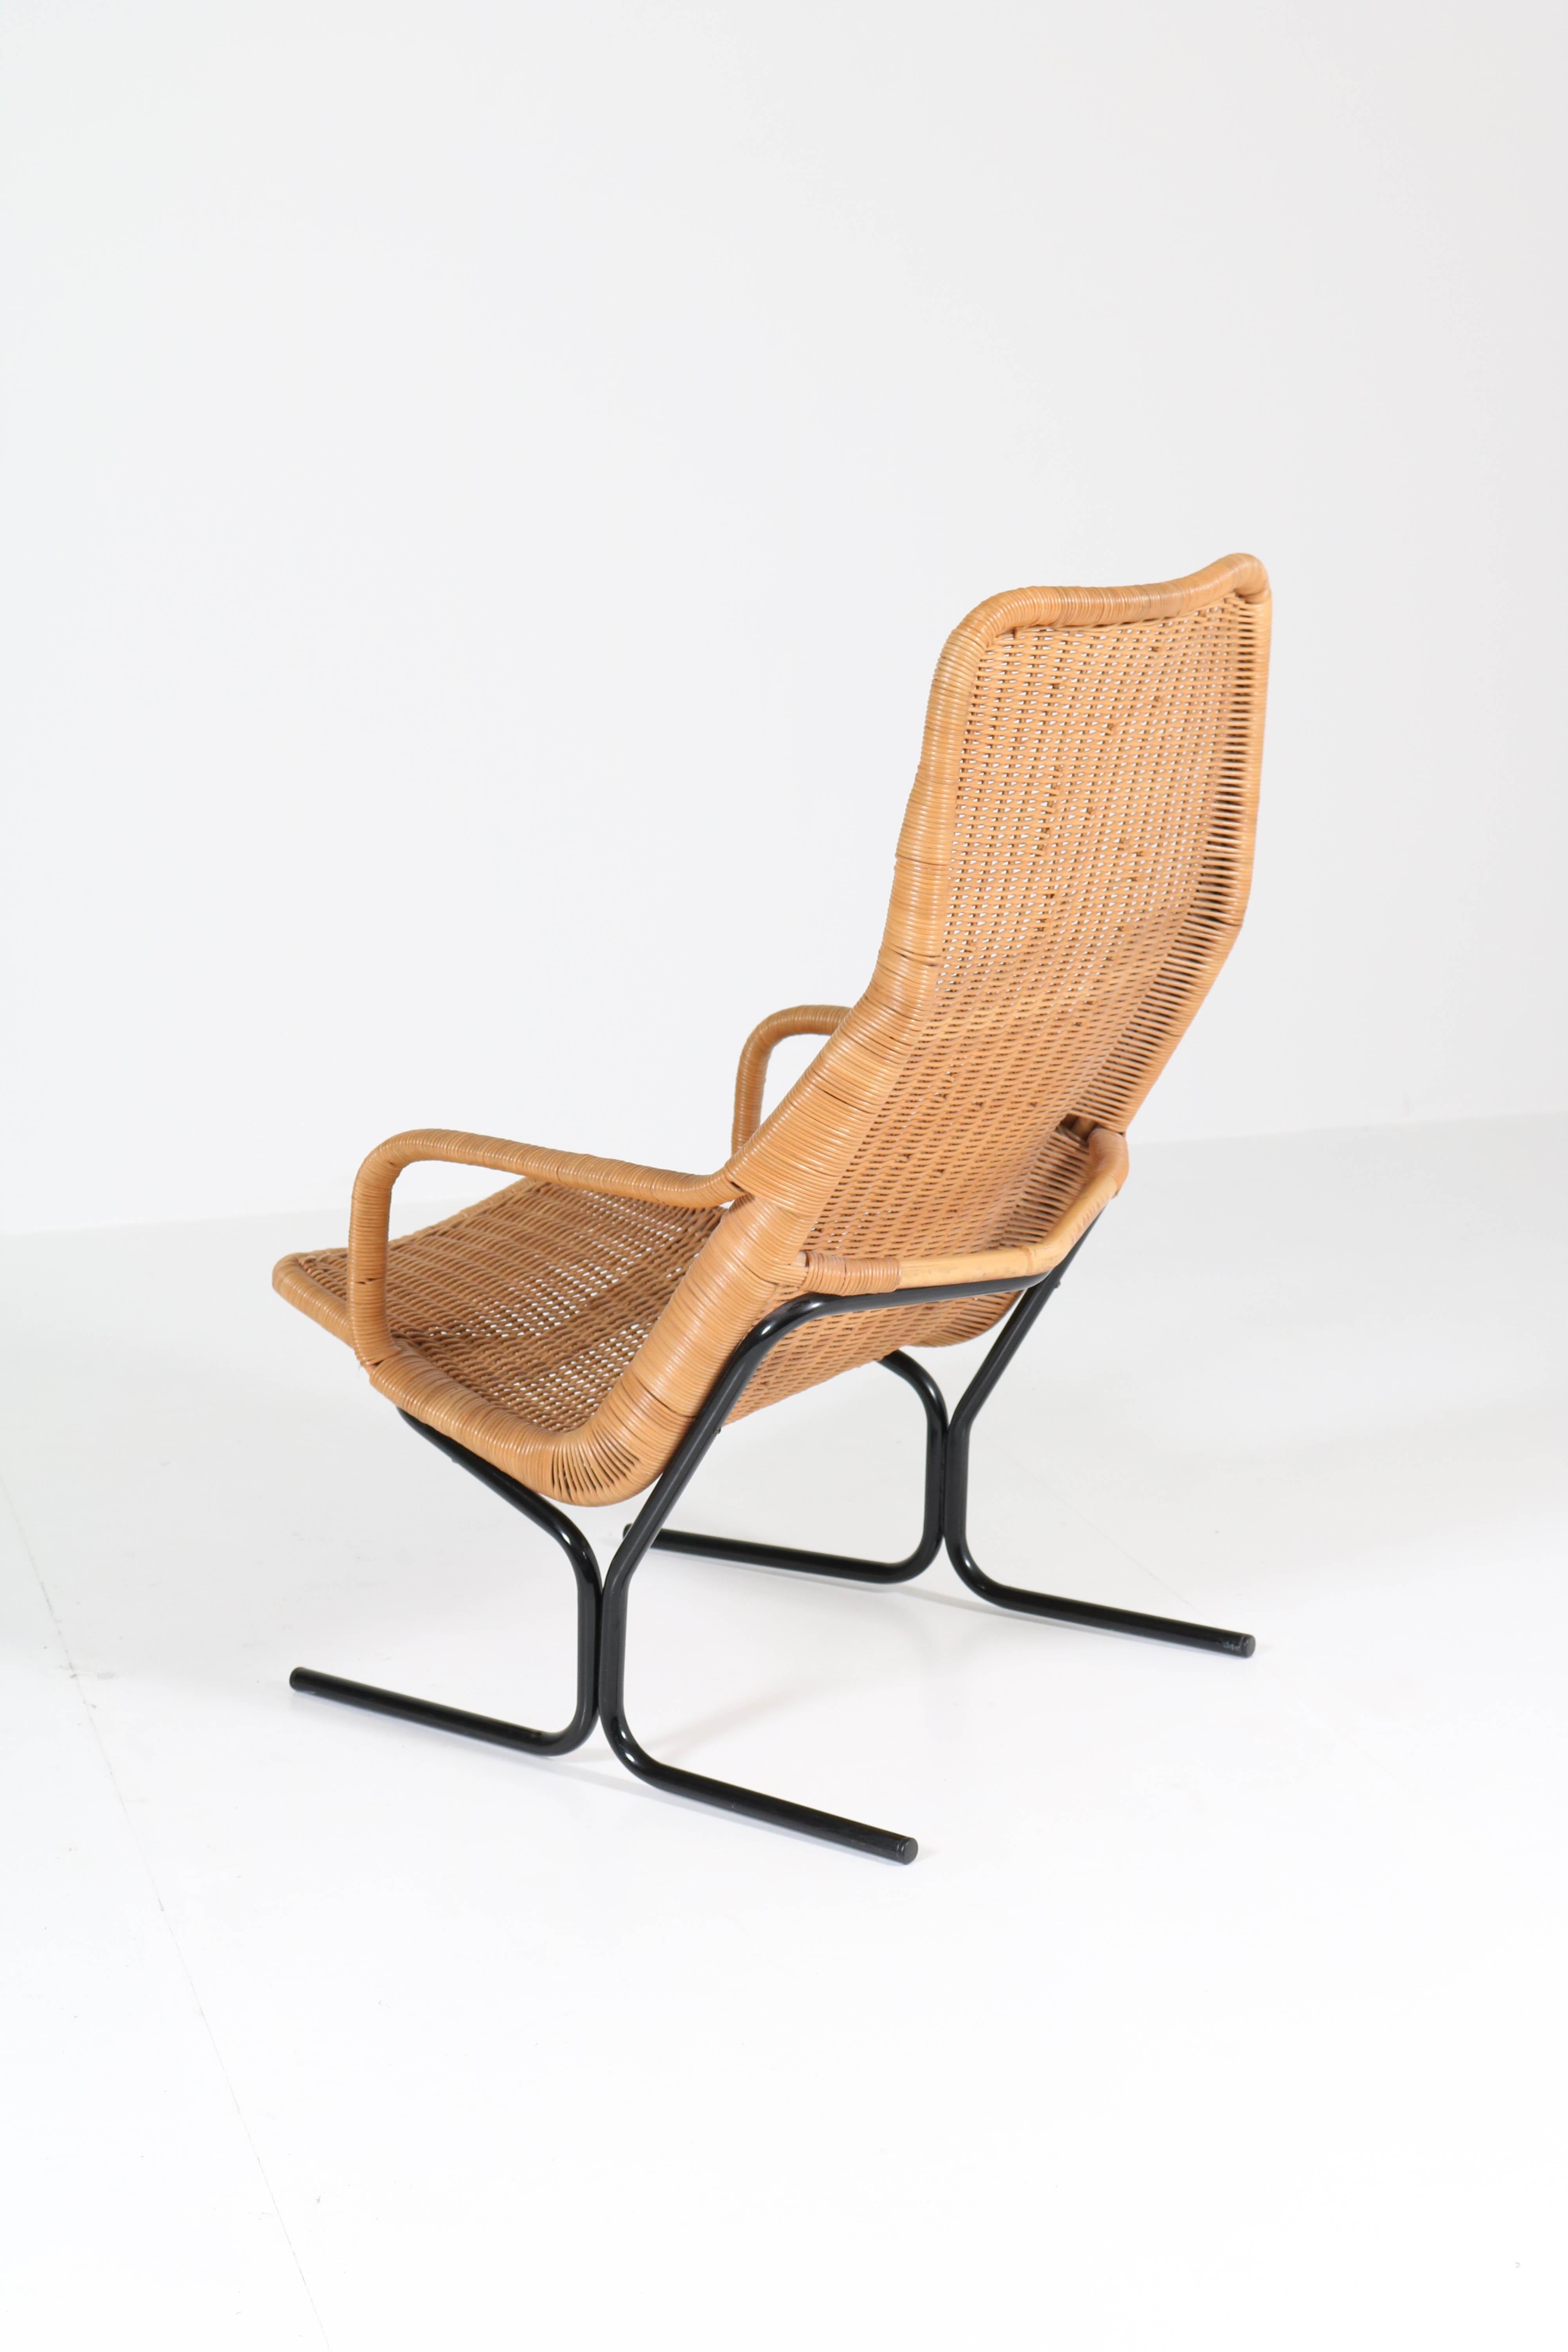 Lacquered Mid-Century Modern Wicker 514 Lounge Chair by Dirk van Sliedrecht for Rohé, 1961